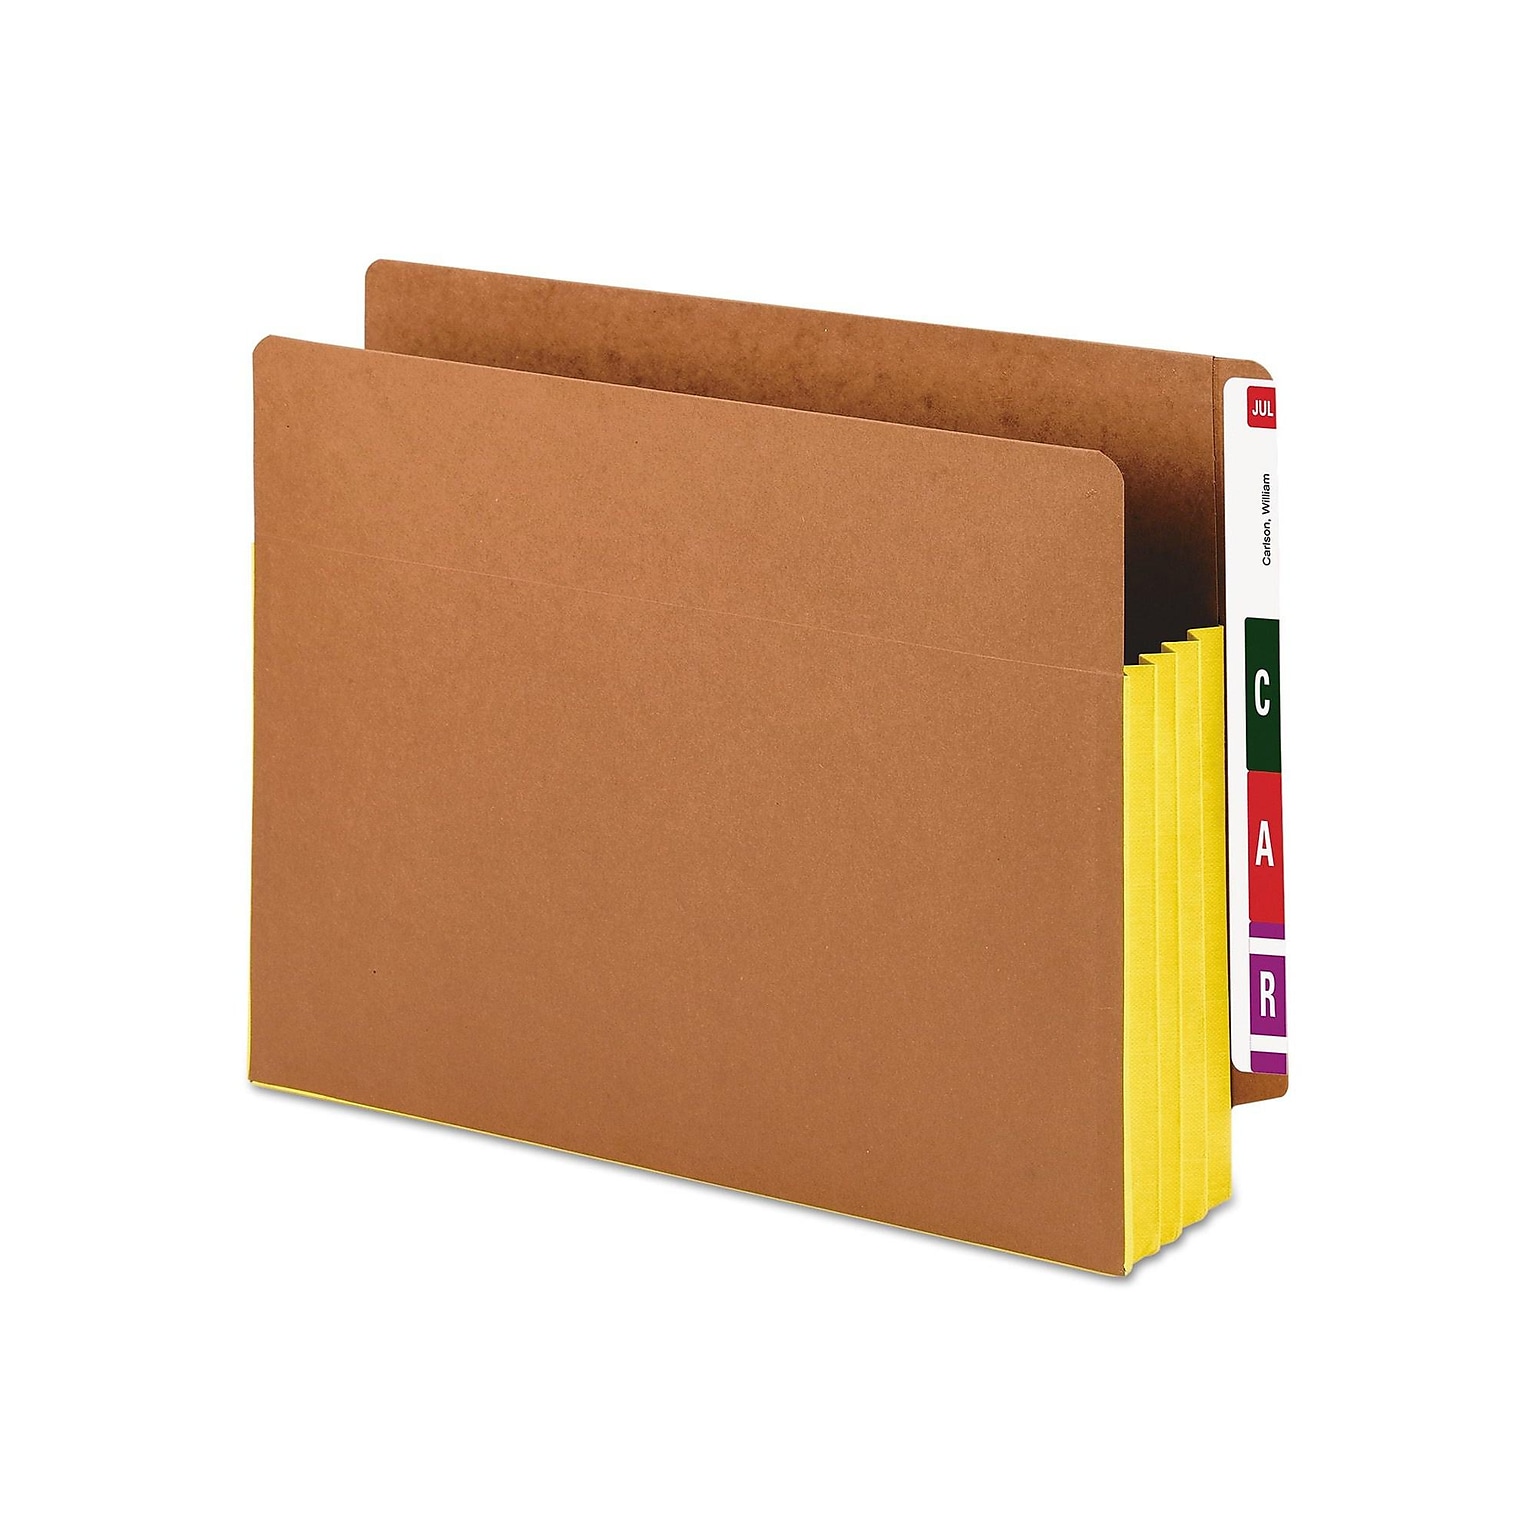 Smead Extra Wide Paper Stock File Pocket, 3.5 Expansion, Yellow/Redrope, 10/Box (73688)